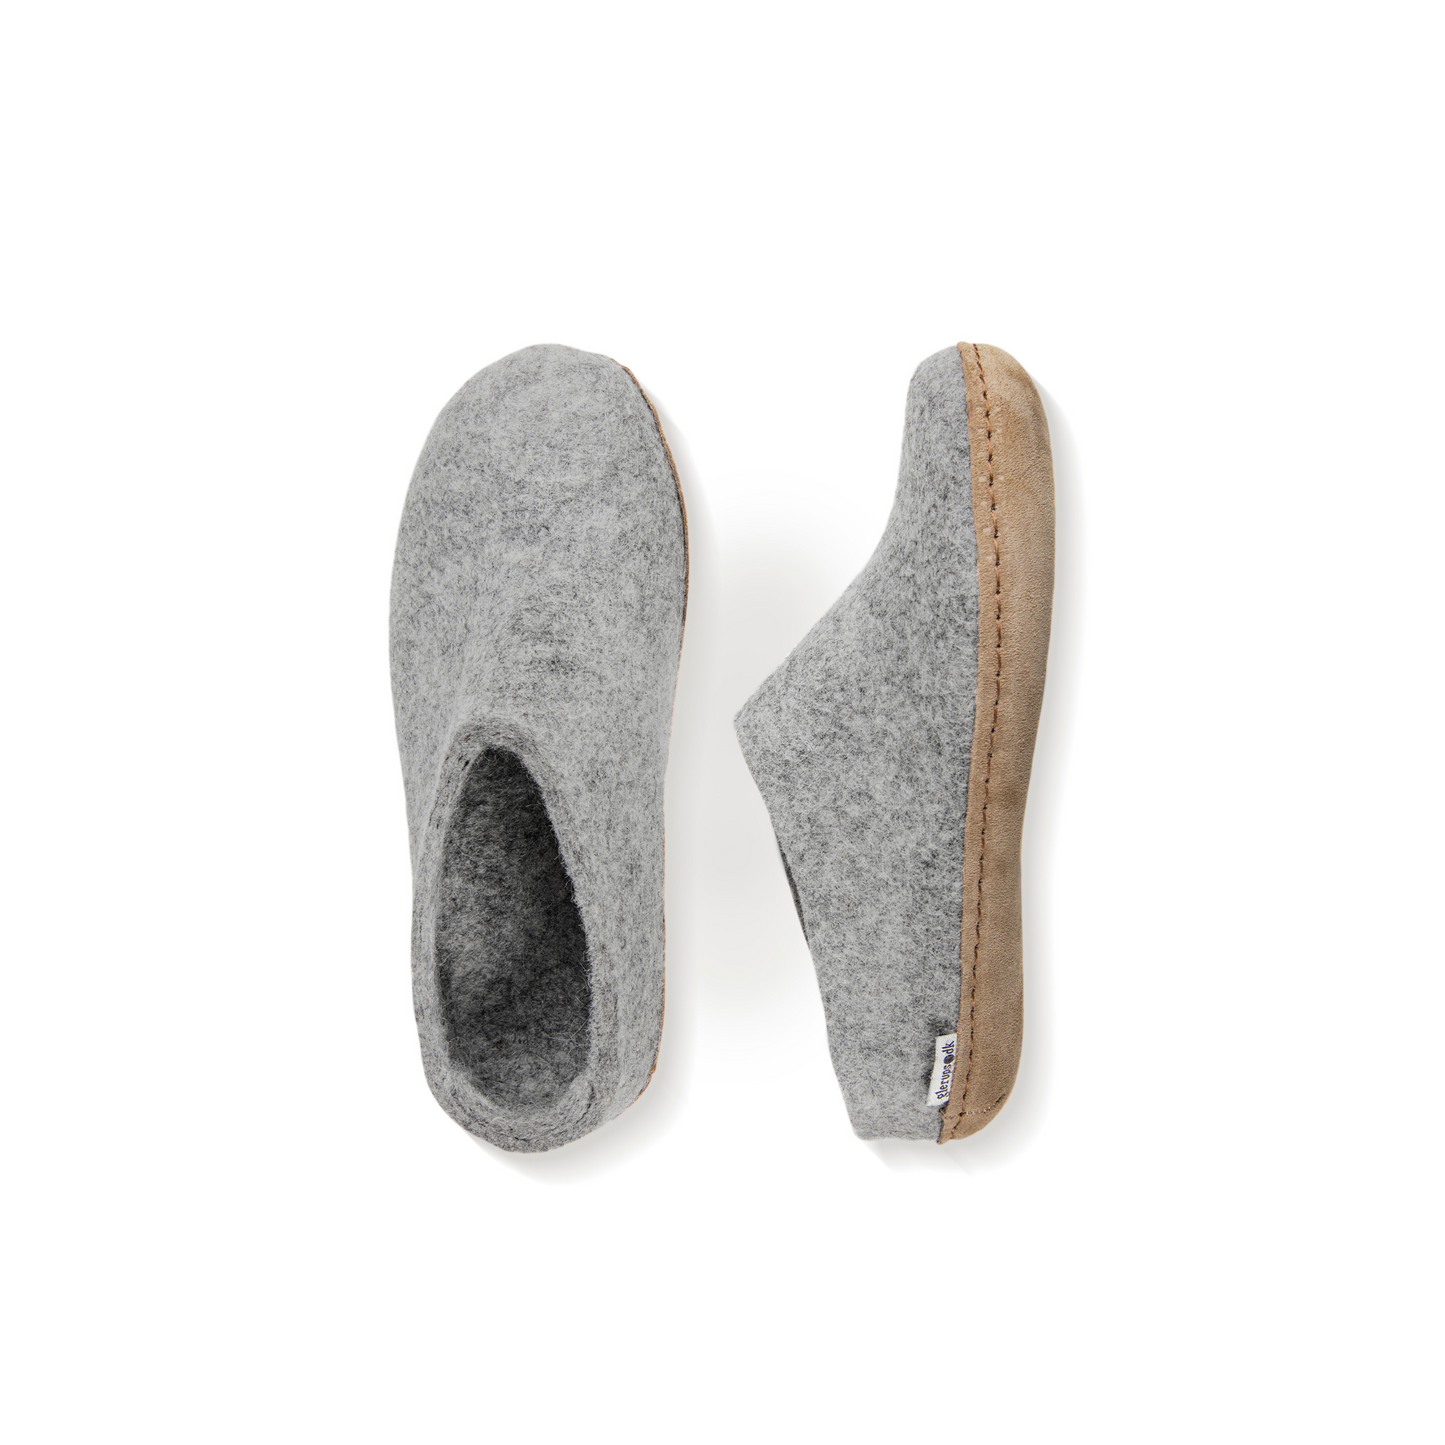 An overhead view of two light grey felted wool slippers. One is pictured straight on, showing the top face of the slipper, while the other lays on its side, showing the profile with tan leather sole with a row of stitching. 